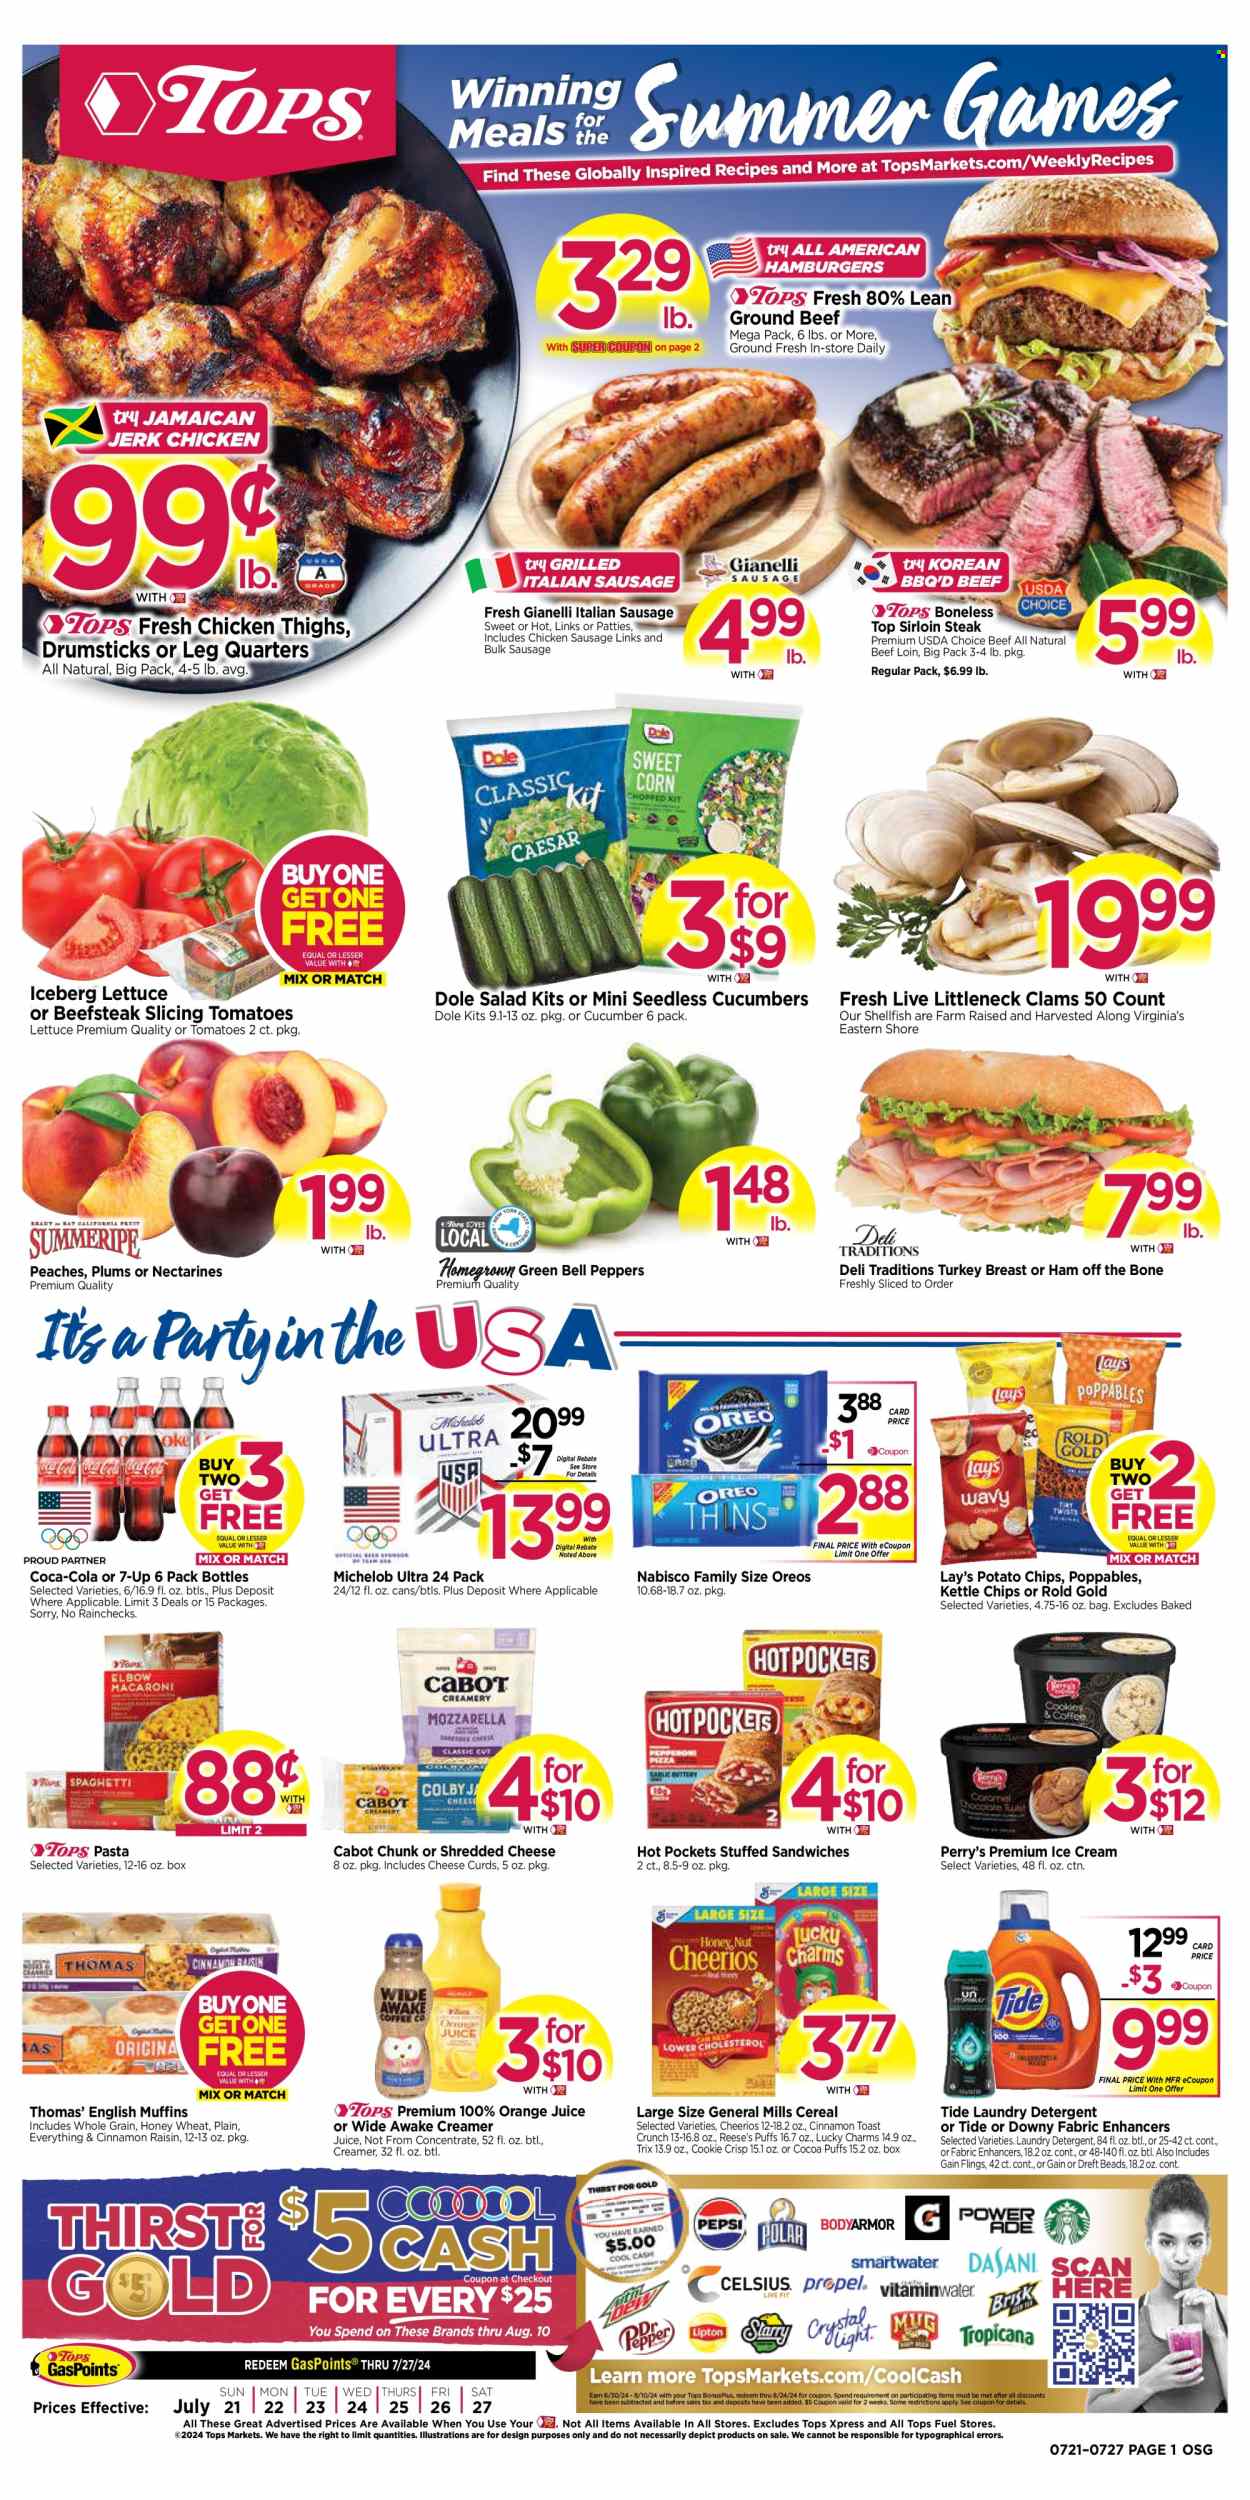 thumbnail - Tops Flyer - 07/21/2024 - 07/27/2024 - Sales products - english muffins, puffs, bell peppers, corn, cucumber, salad greens, tomatoes, lettuce, salad, Dole, peppers, sweet corn, nectarines, plums, peaches, clams, hot pocket, sandwich, hamburger, pasta, ready meal, turkey breast, ham off the bone, bulk sausage, chicken sausage, italian sausage, shredded cheese, cheese curd, chunk cheese, Oreo, creamer, ice cream, Reese's, Nabisco, General Mills, potato chips, Lay’s, Kettle chips, salty snack, cereals, Cheerios, Trix, Coca-Cola, orange juice, juice, soft drink, 7UP, carbonated soft drink, beer, chicken thighs, turkey, beef meat, beef sirloin, steak, sirloin steak, detergent, Gain, Tide, fabric softener, laundry detergent, Downy Laundry, Michelob. Page 1.